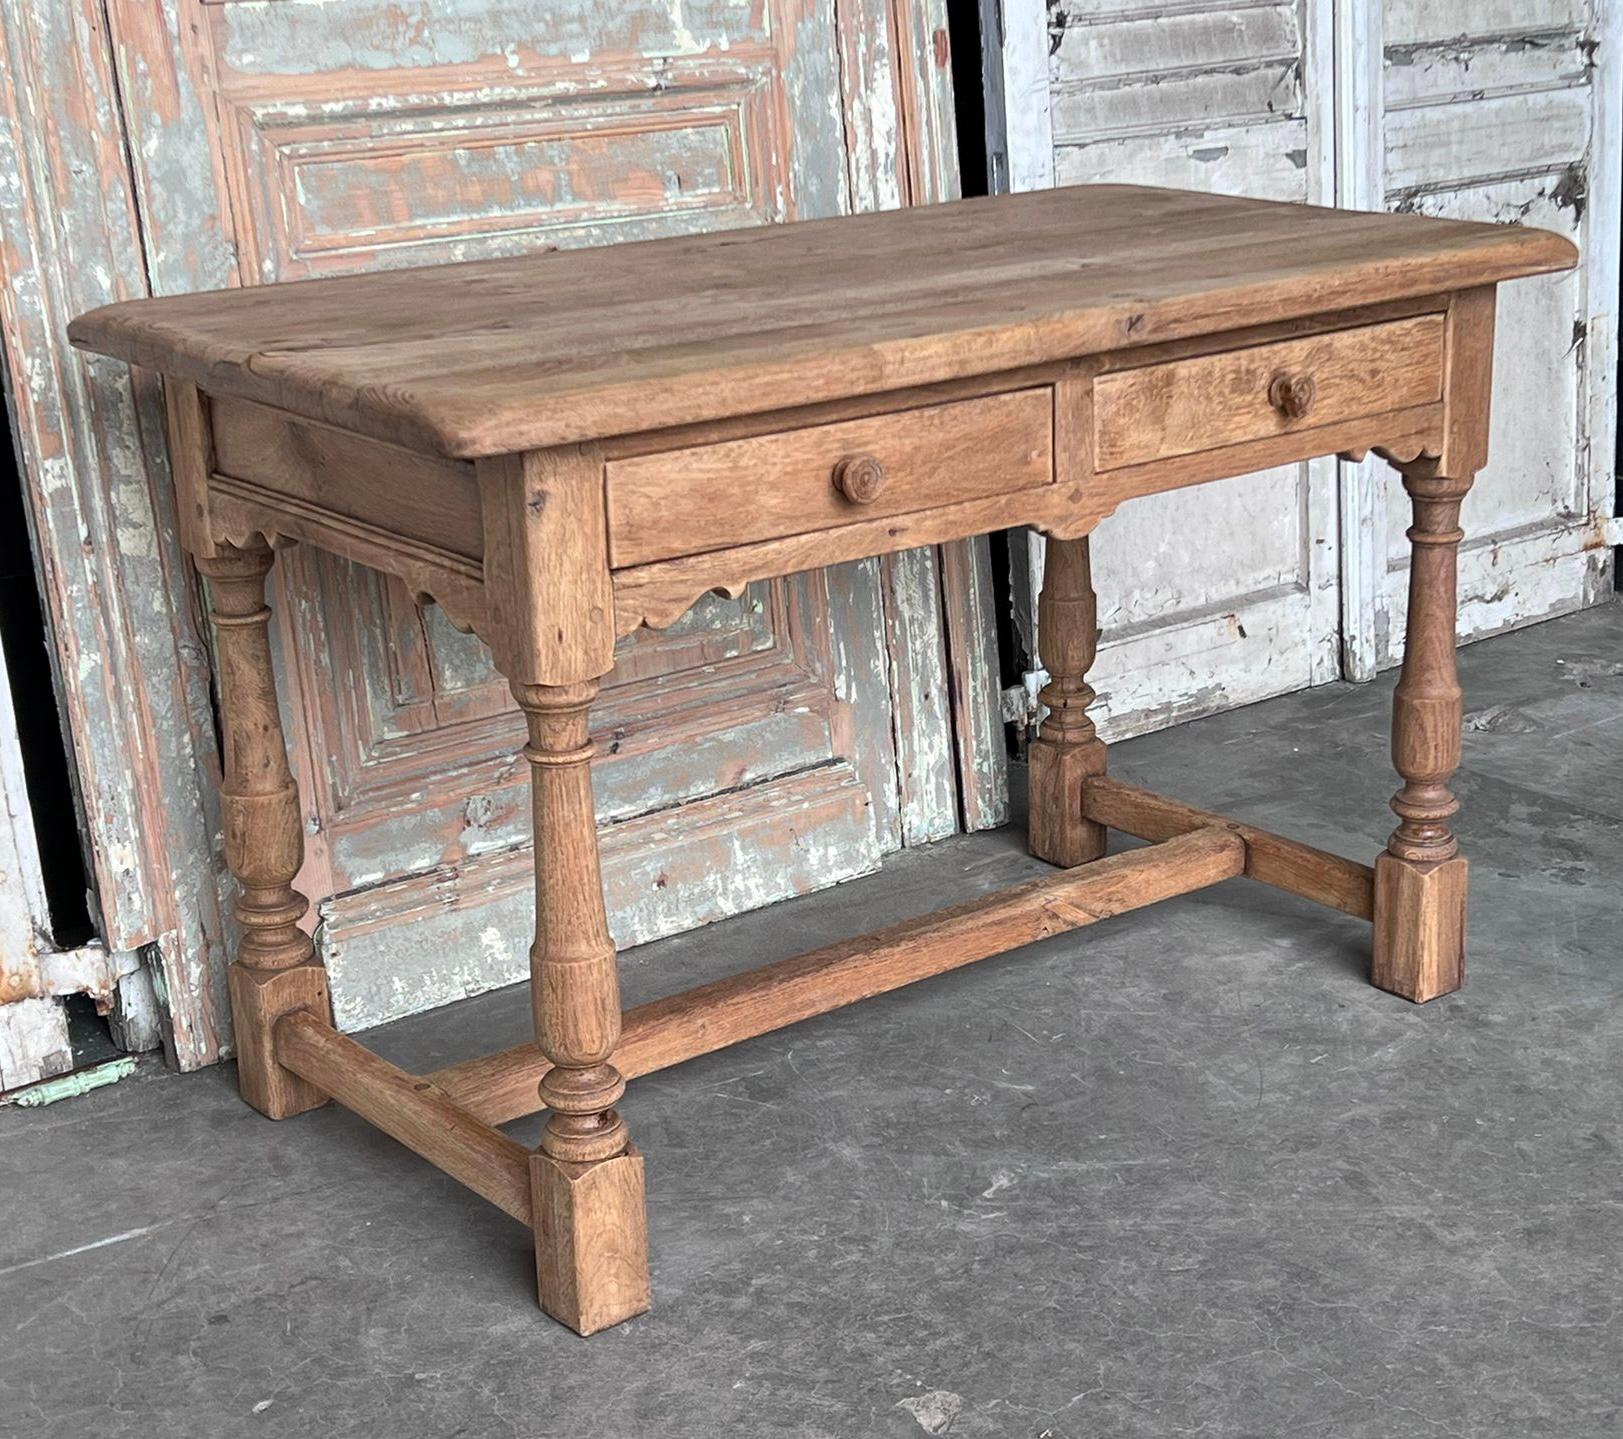 A lovely French bleached Oak 2 drawer side or writing table. The drawers run smoothly but part of one knob is missing otherwise in excellent original condition.
Width 125 cm
Depth 68 cm
Height 78 cm.